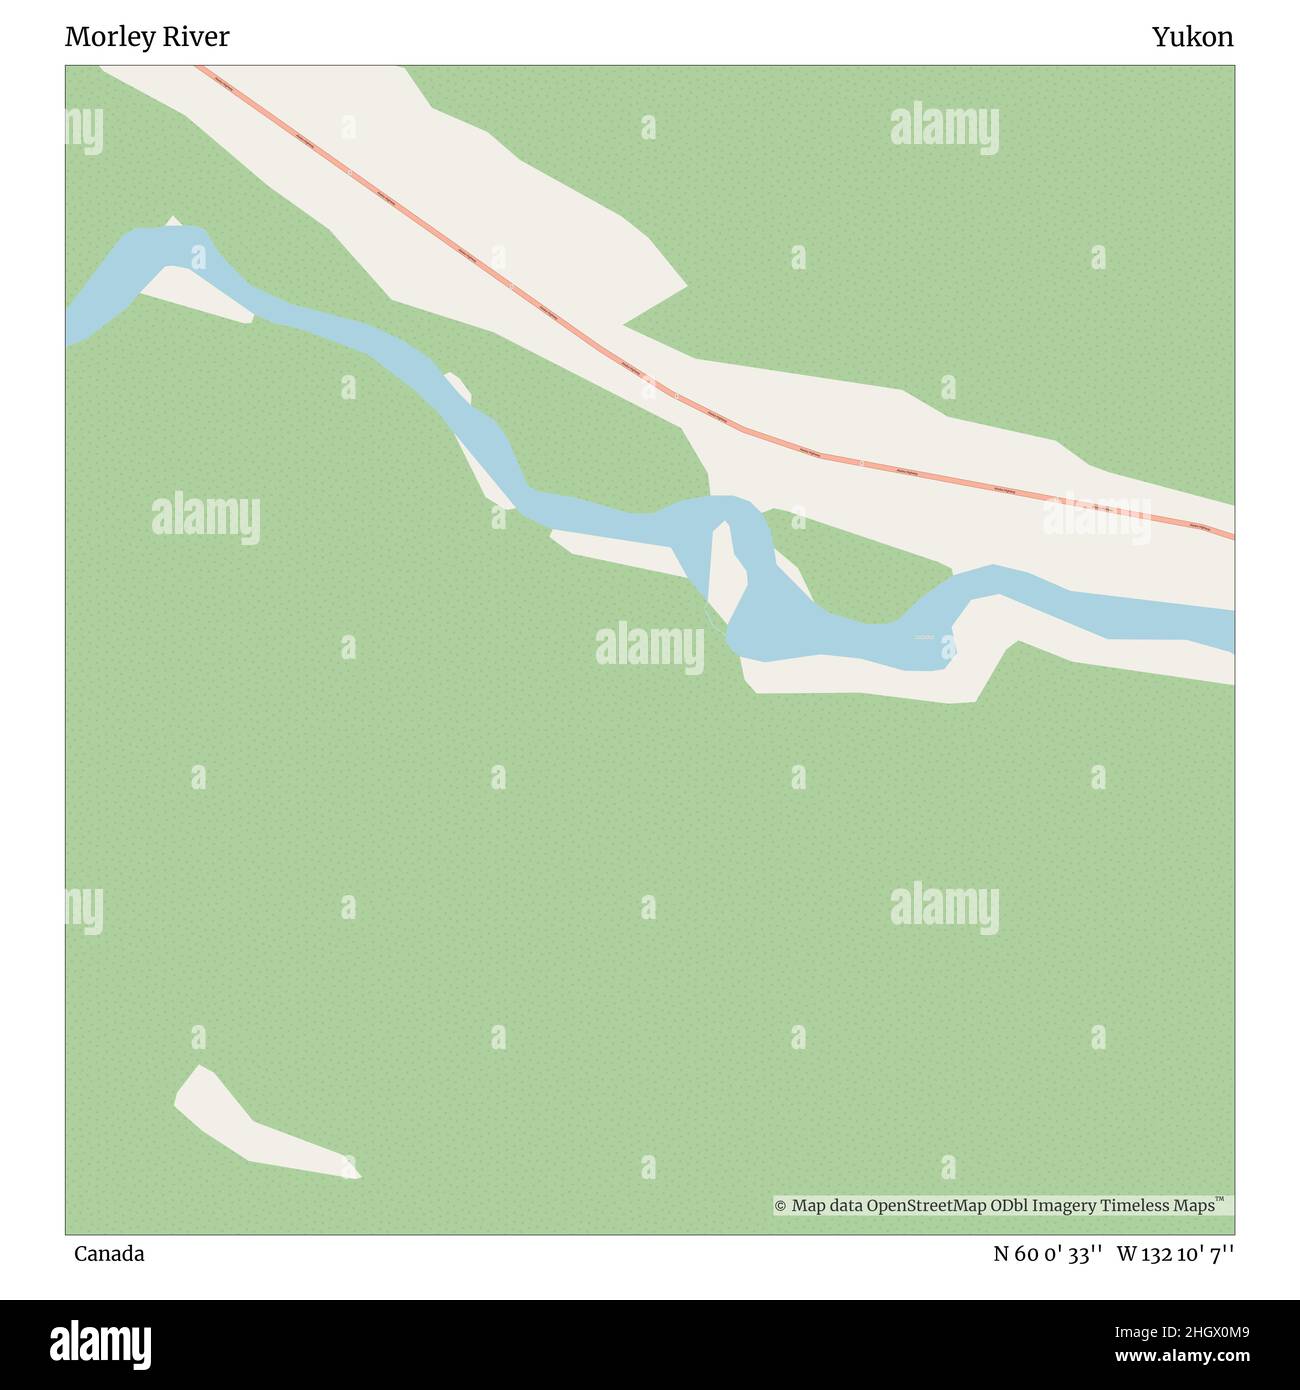 Morley River, Canada, Yukon, N 60 0' 33'', W 132 10' 7'', map, Timeless Map published in 2021. Travelers, explorers and adventurers like Florence Nightingale, David Livingstone, Ernest Shackleton, Lewis and Clark and Sherlock Holmes relied on maps to plan travels to the world's most remote corners, Timeless Maps is mapping most locations on the globe, showing the achievement of great dreams Stock Photo